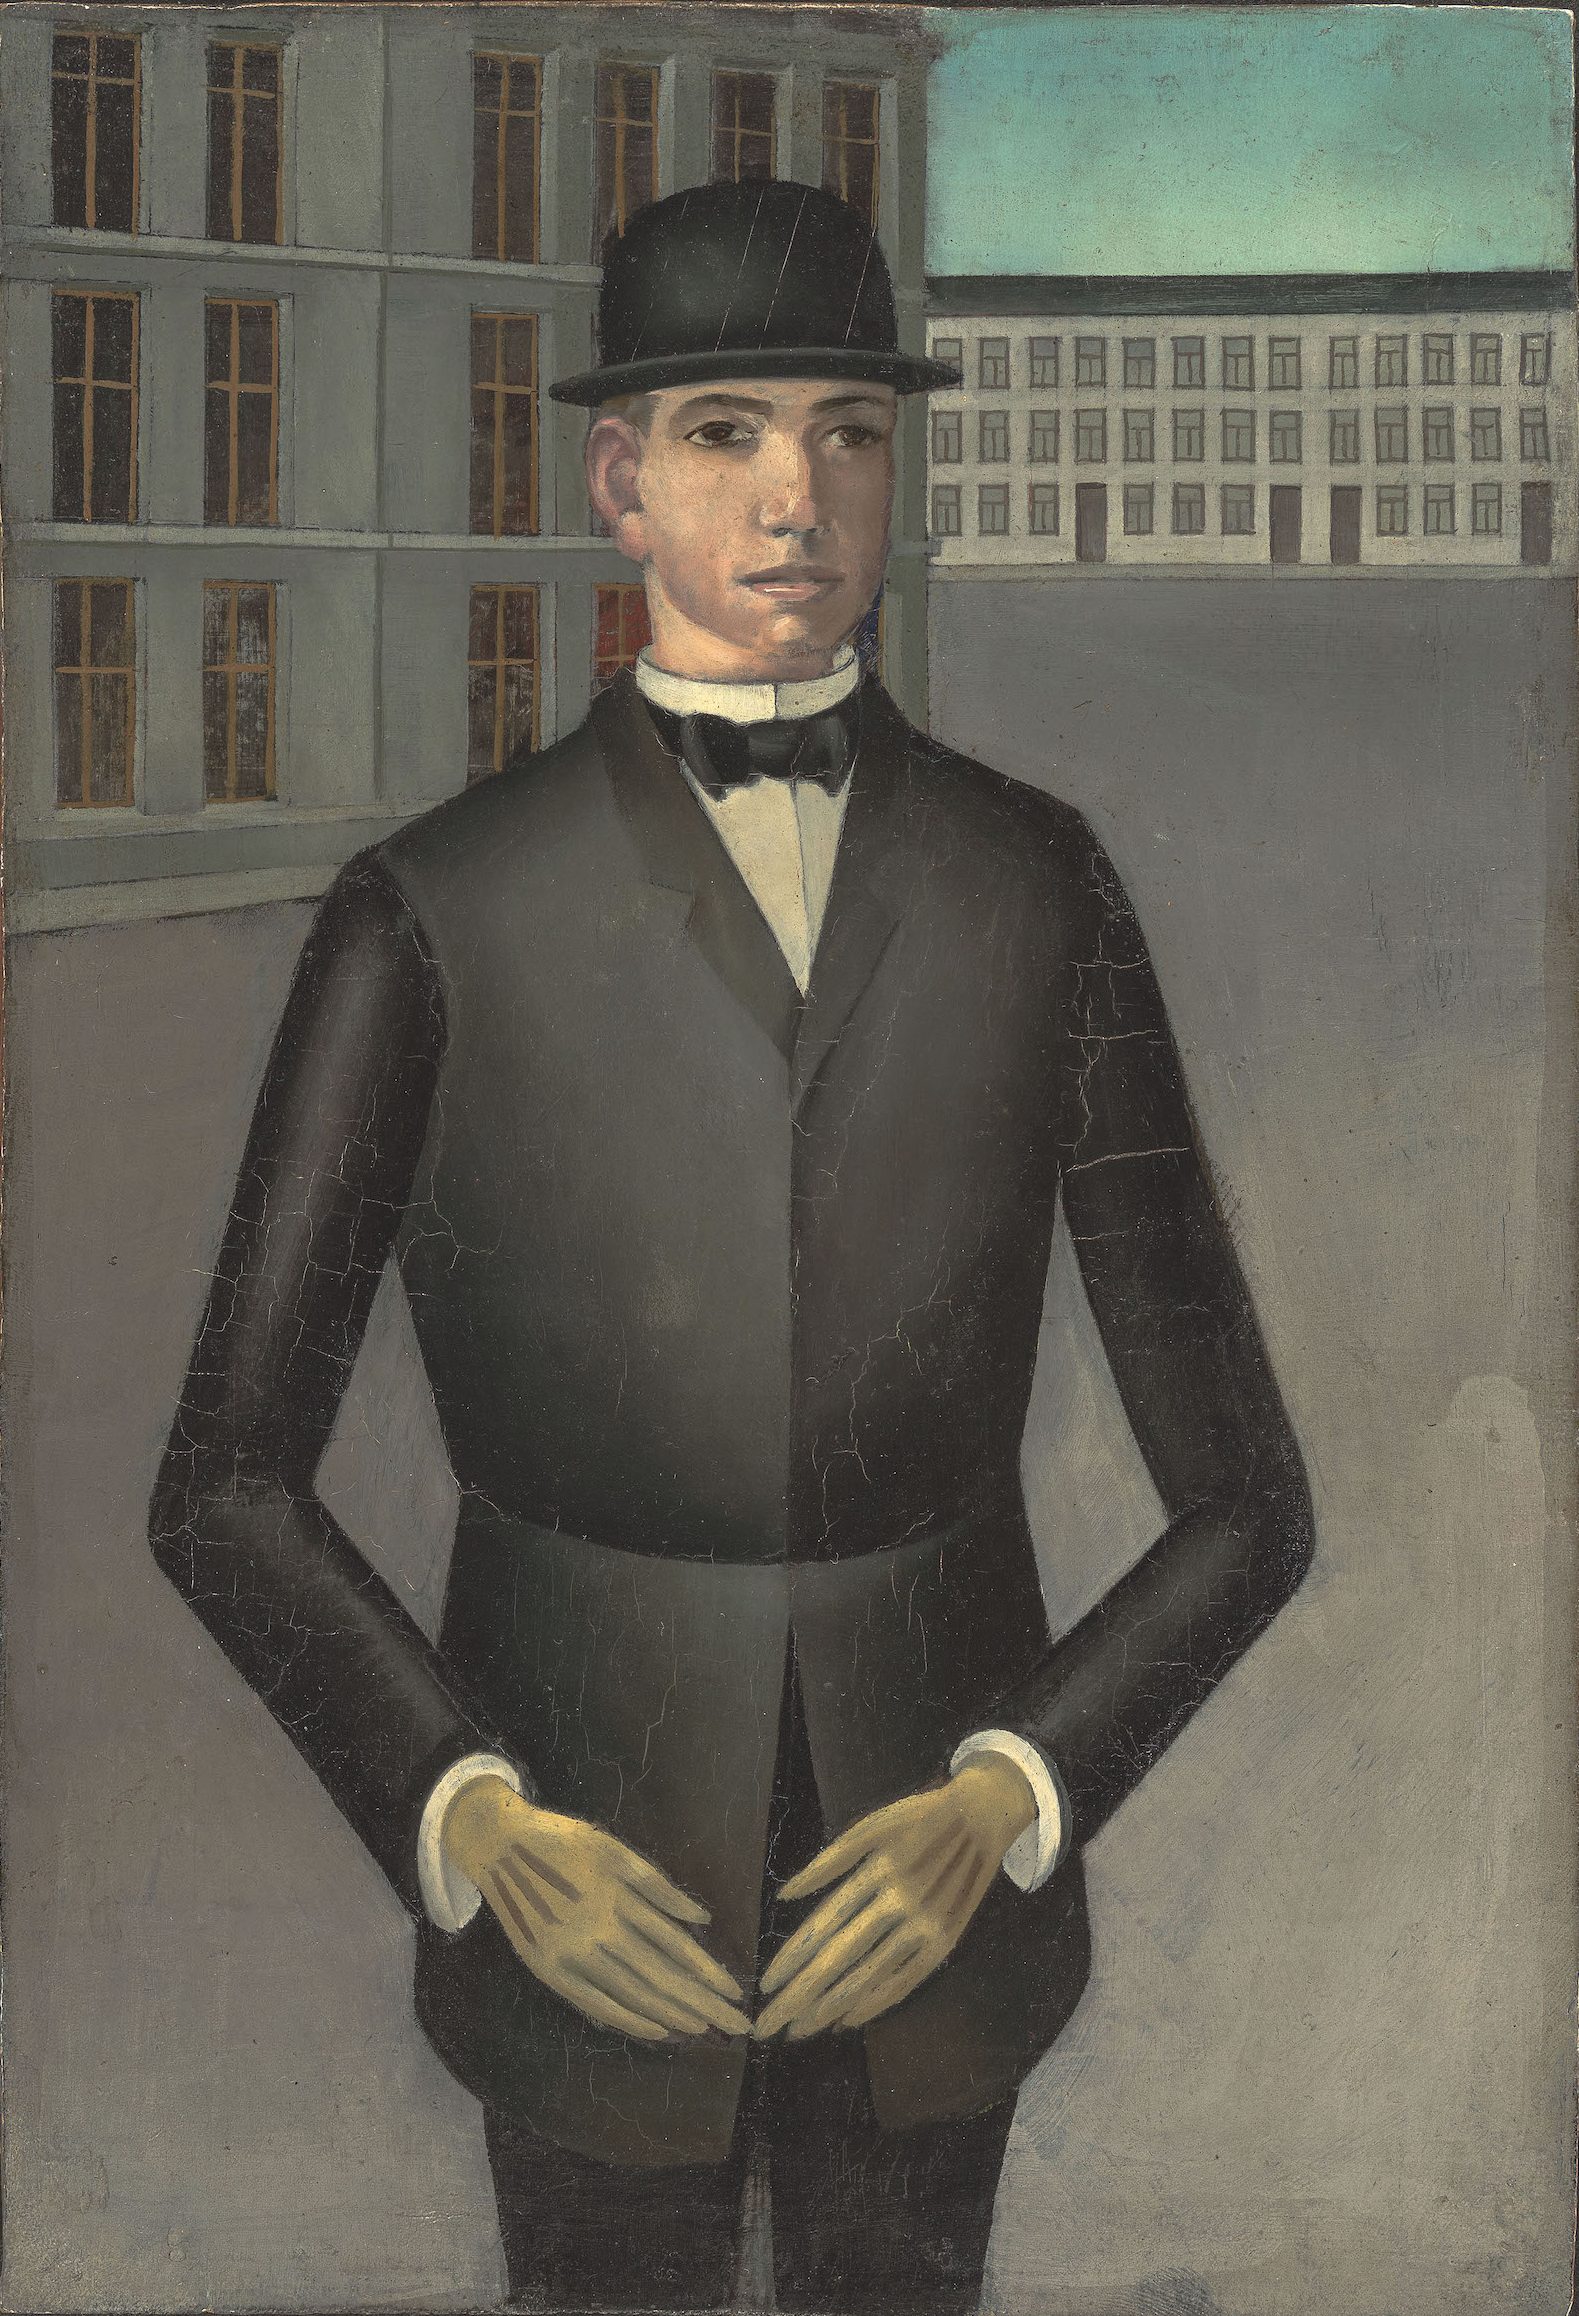 A painting of a man in a suit and bowler hat standing in a deserted street